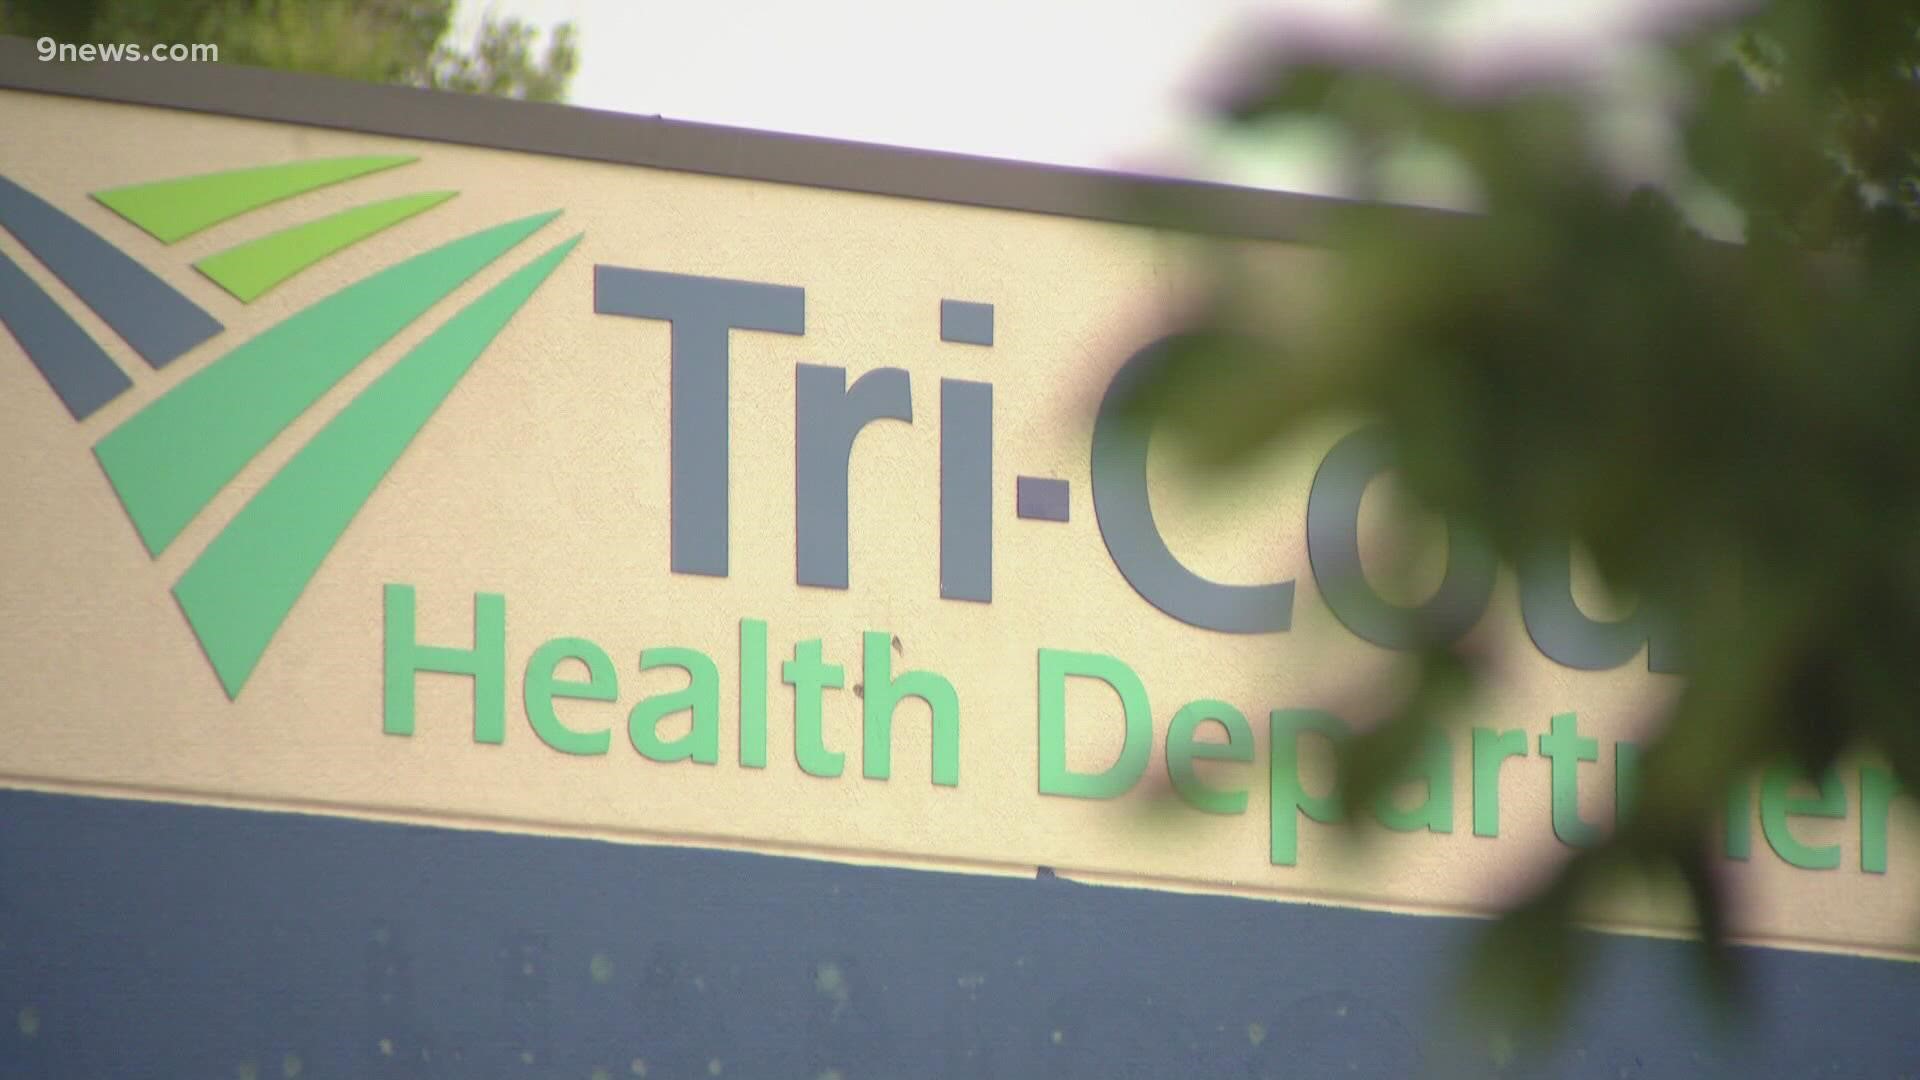 Arapahoe County is considering withdrawing from the Tri-County Health Department effective December 31, 2022.